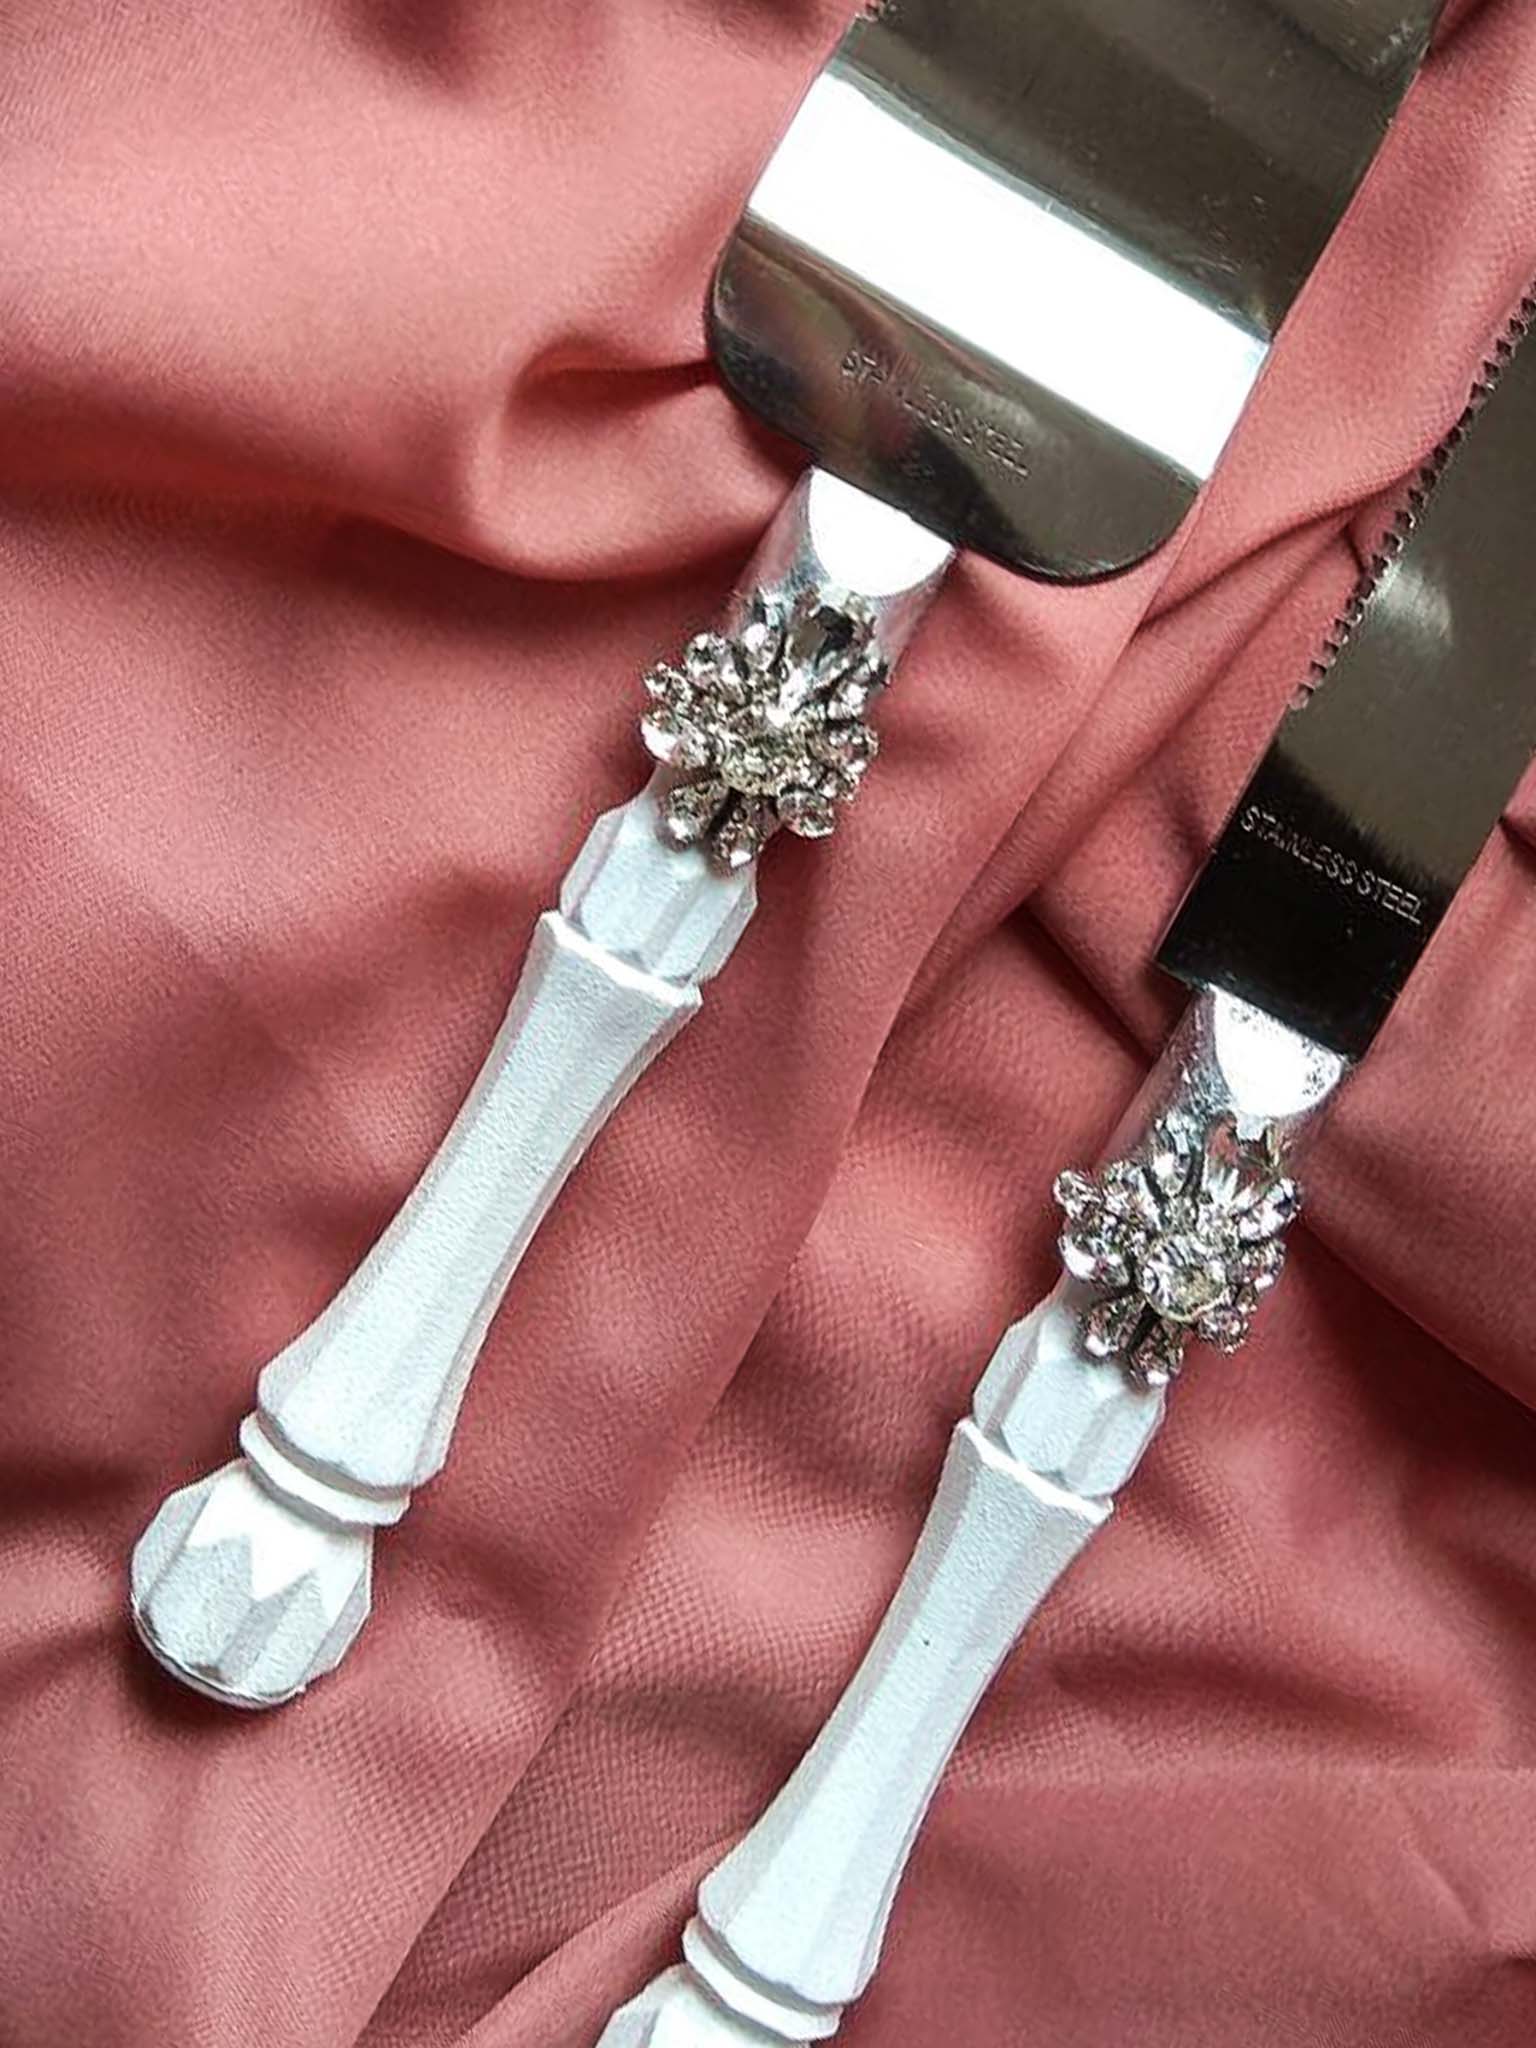 Timeless white and silver wedding utensils with crystals